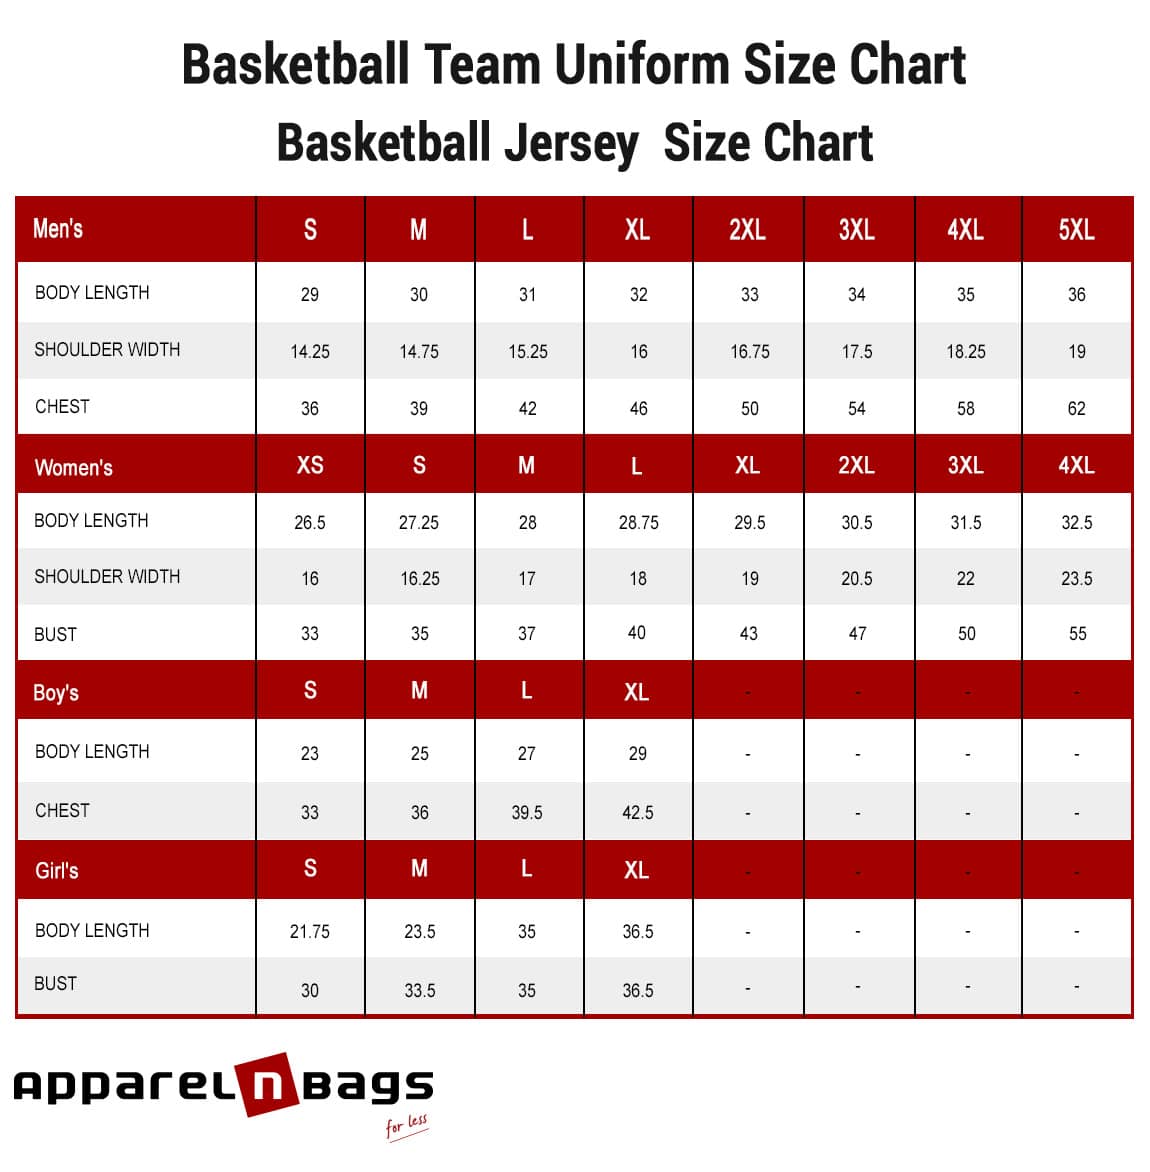 NBA JERSEY SIZING GUIDE FOR SKINNY AND YOUTH 